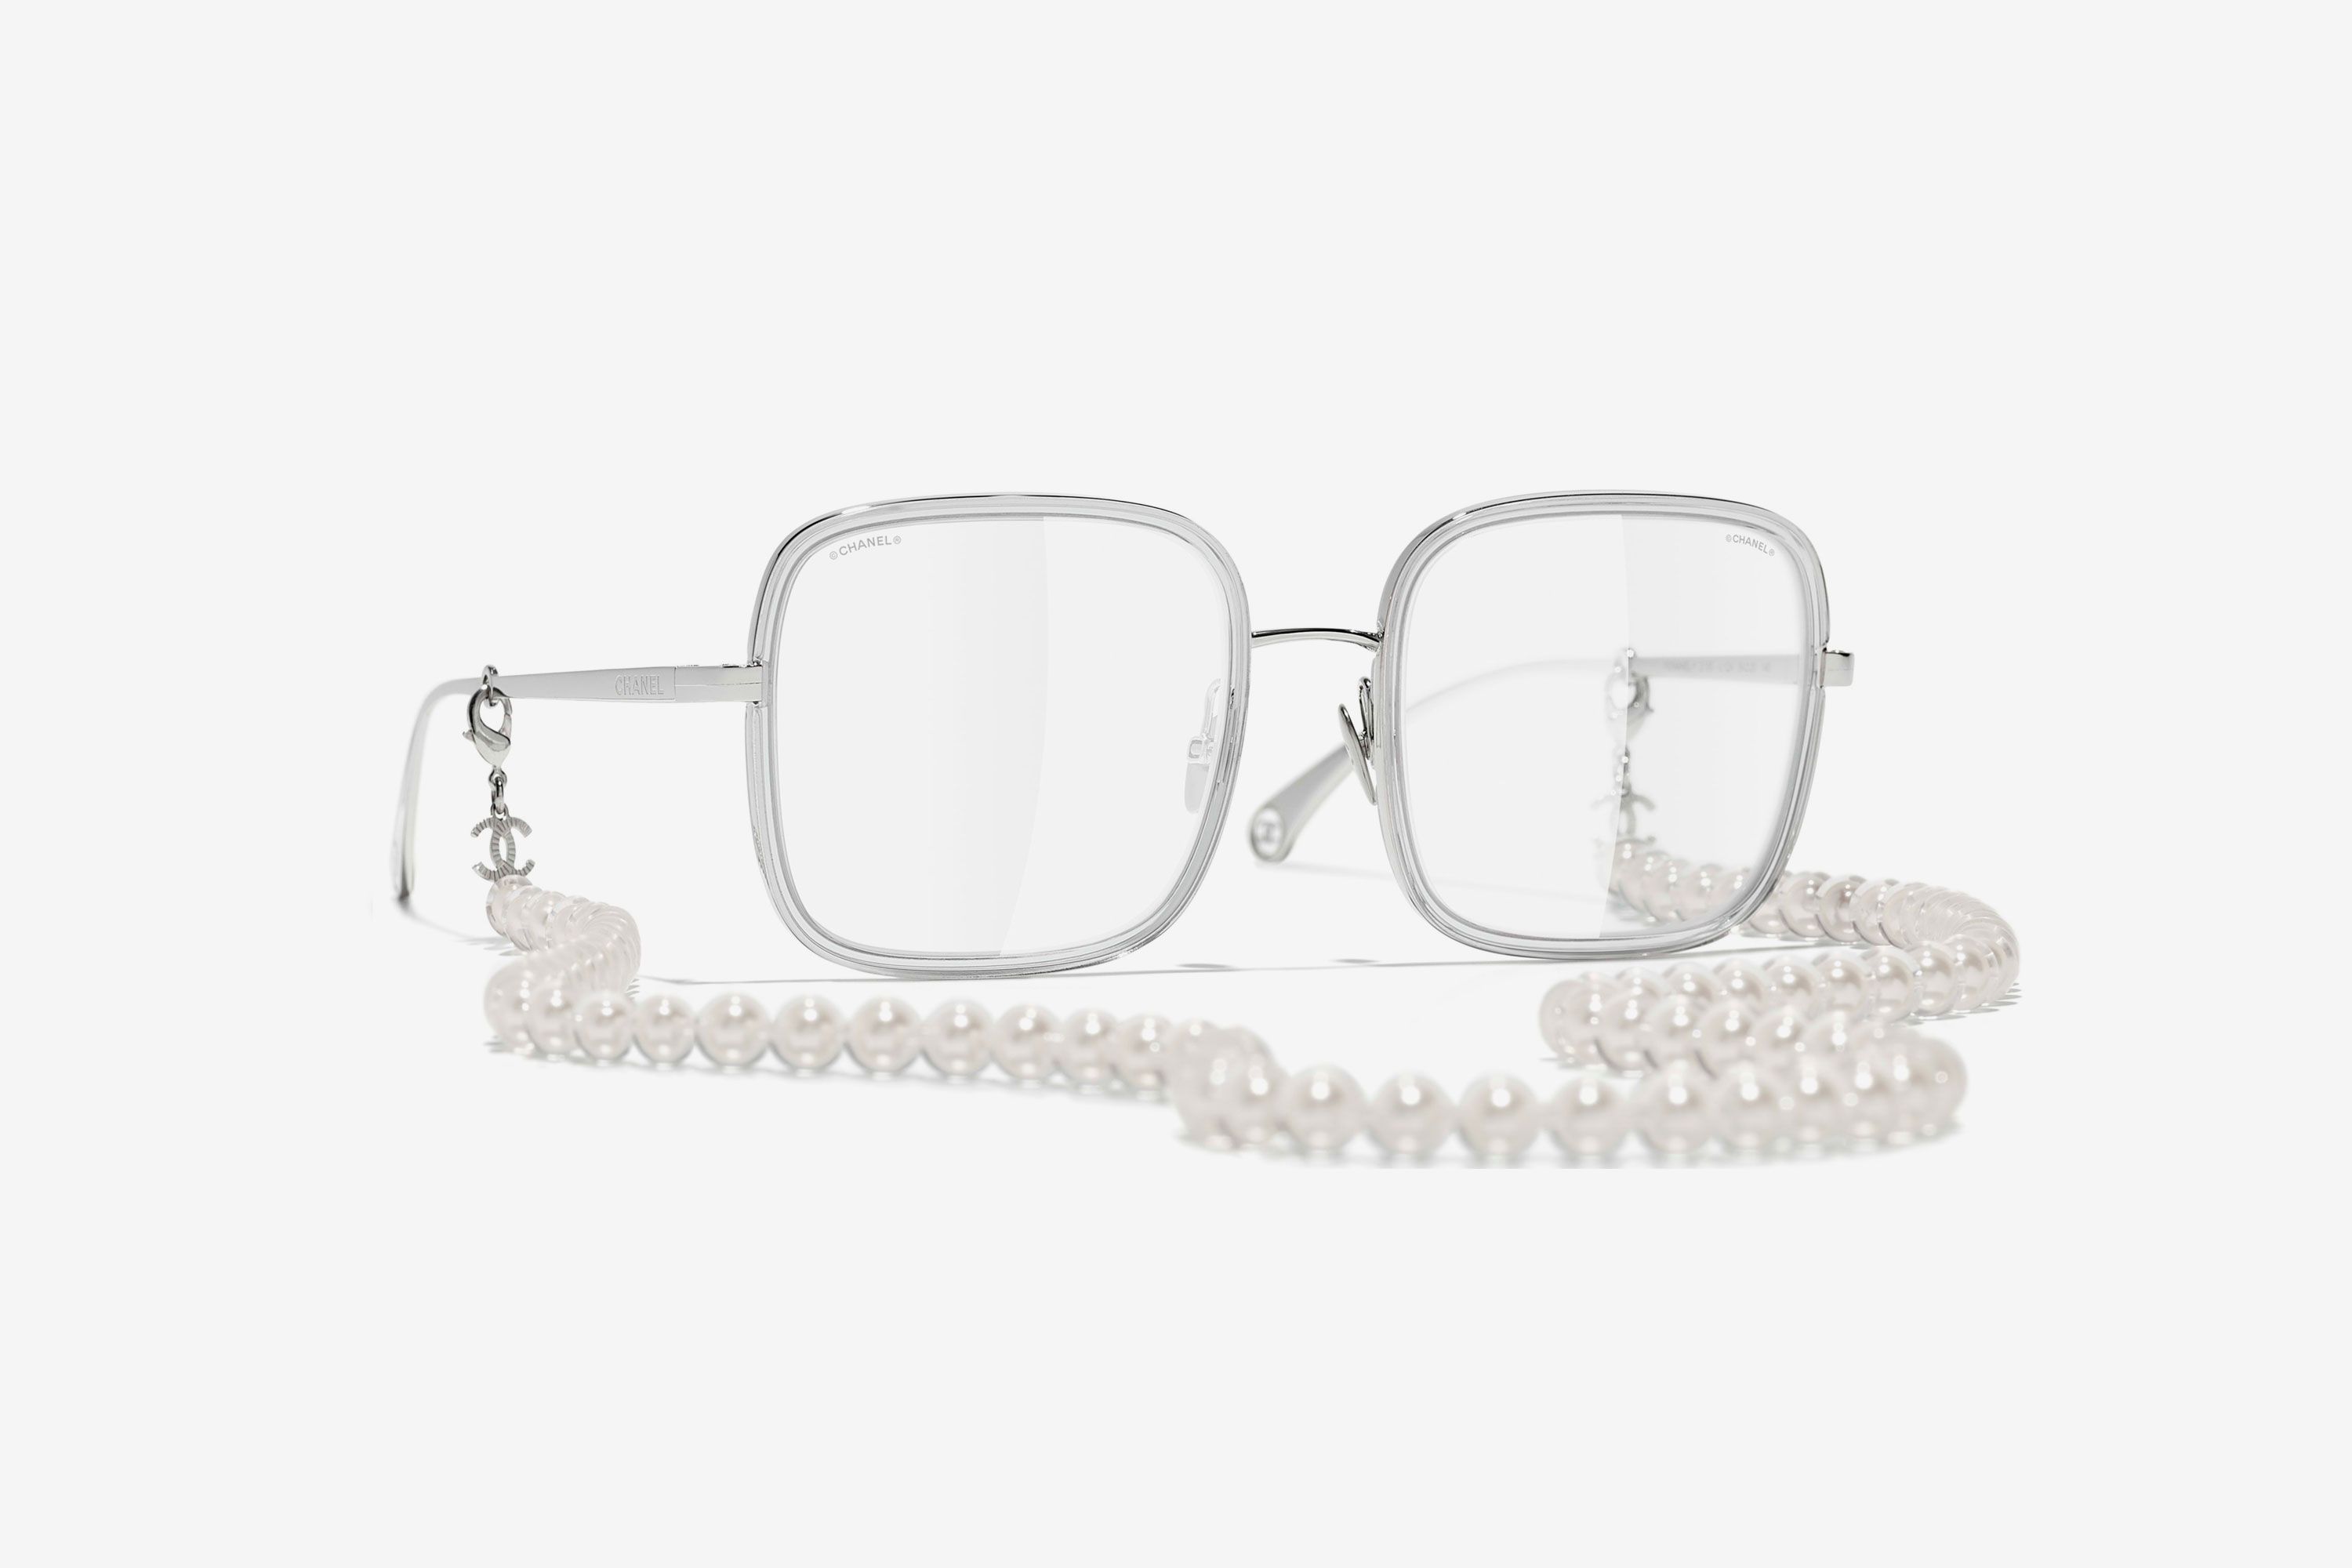 Chanel Launches Online Eyeglasses Store